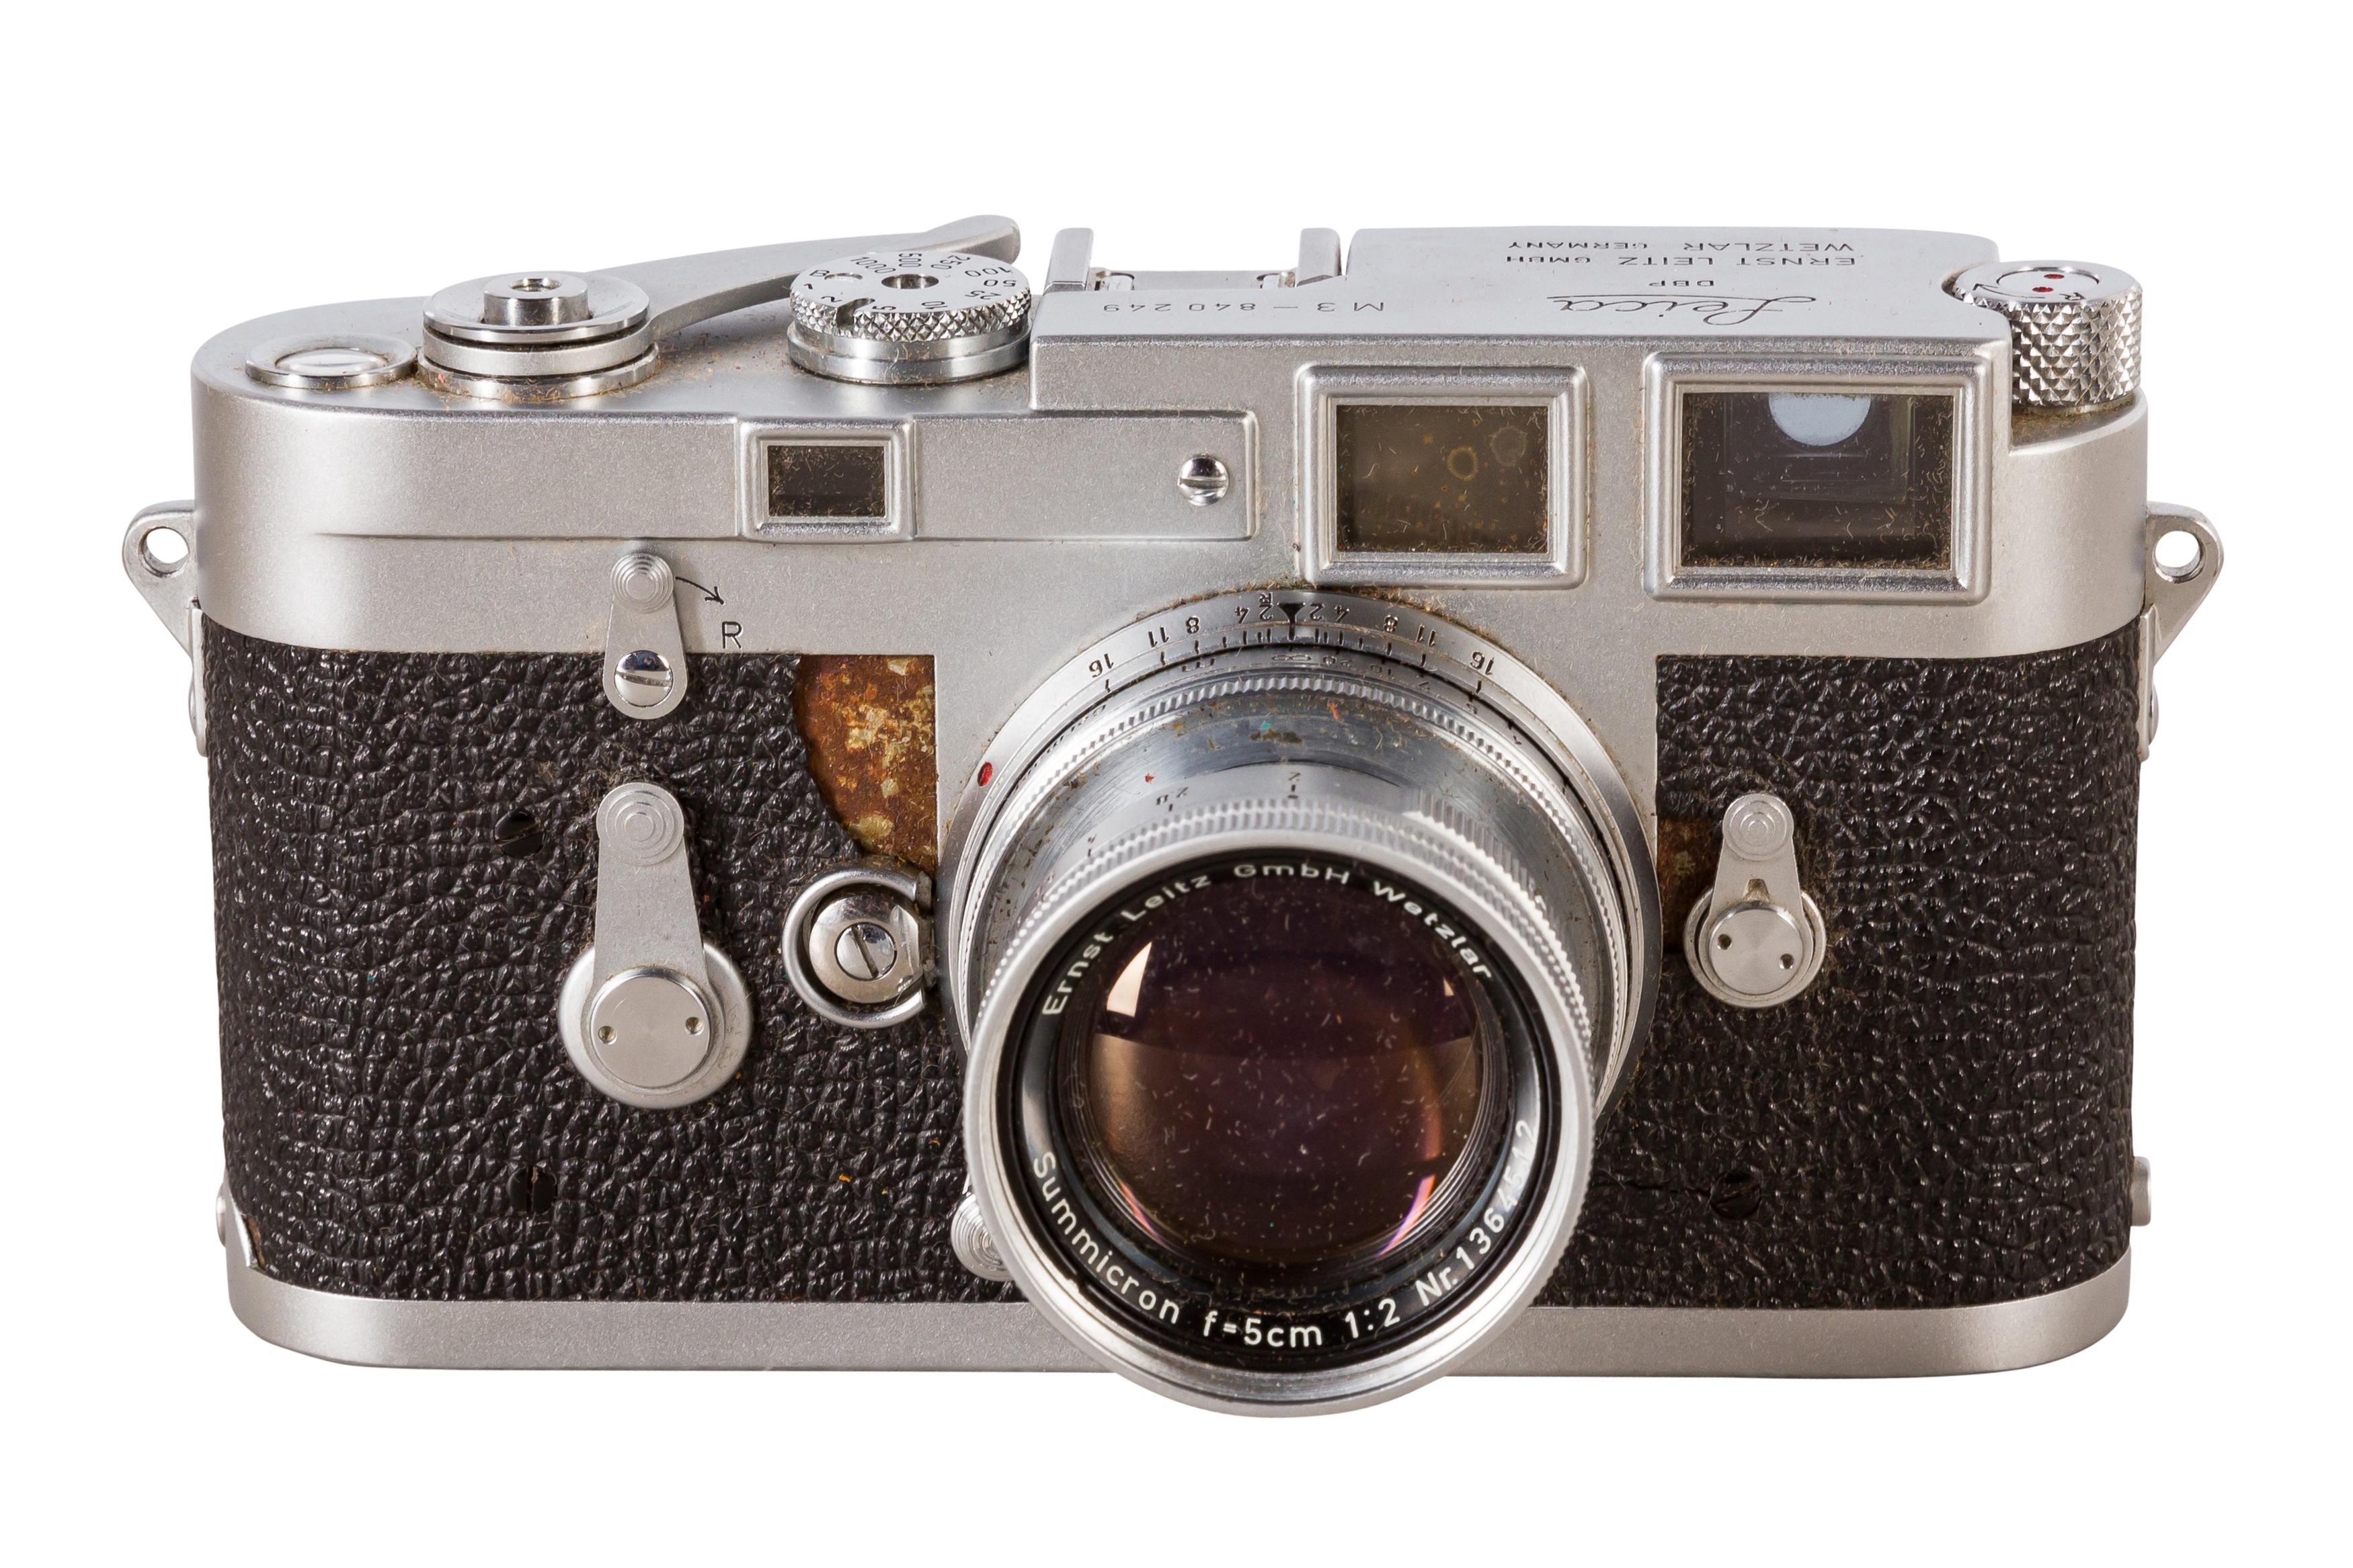 A Leica M3 DS Rangefinder Camera  - Image 2 of 5